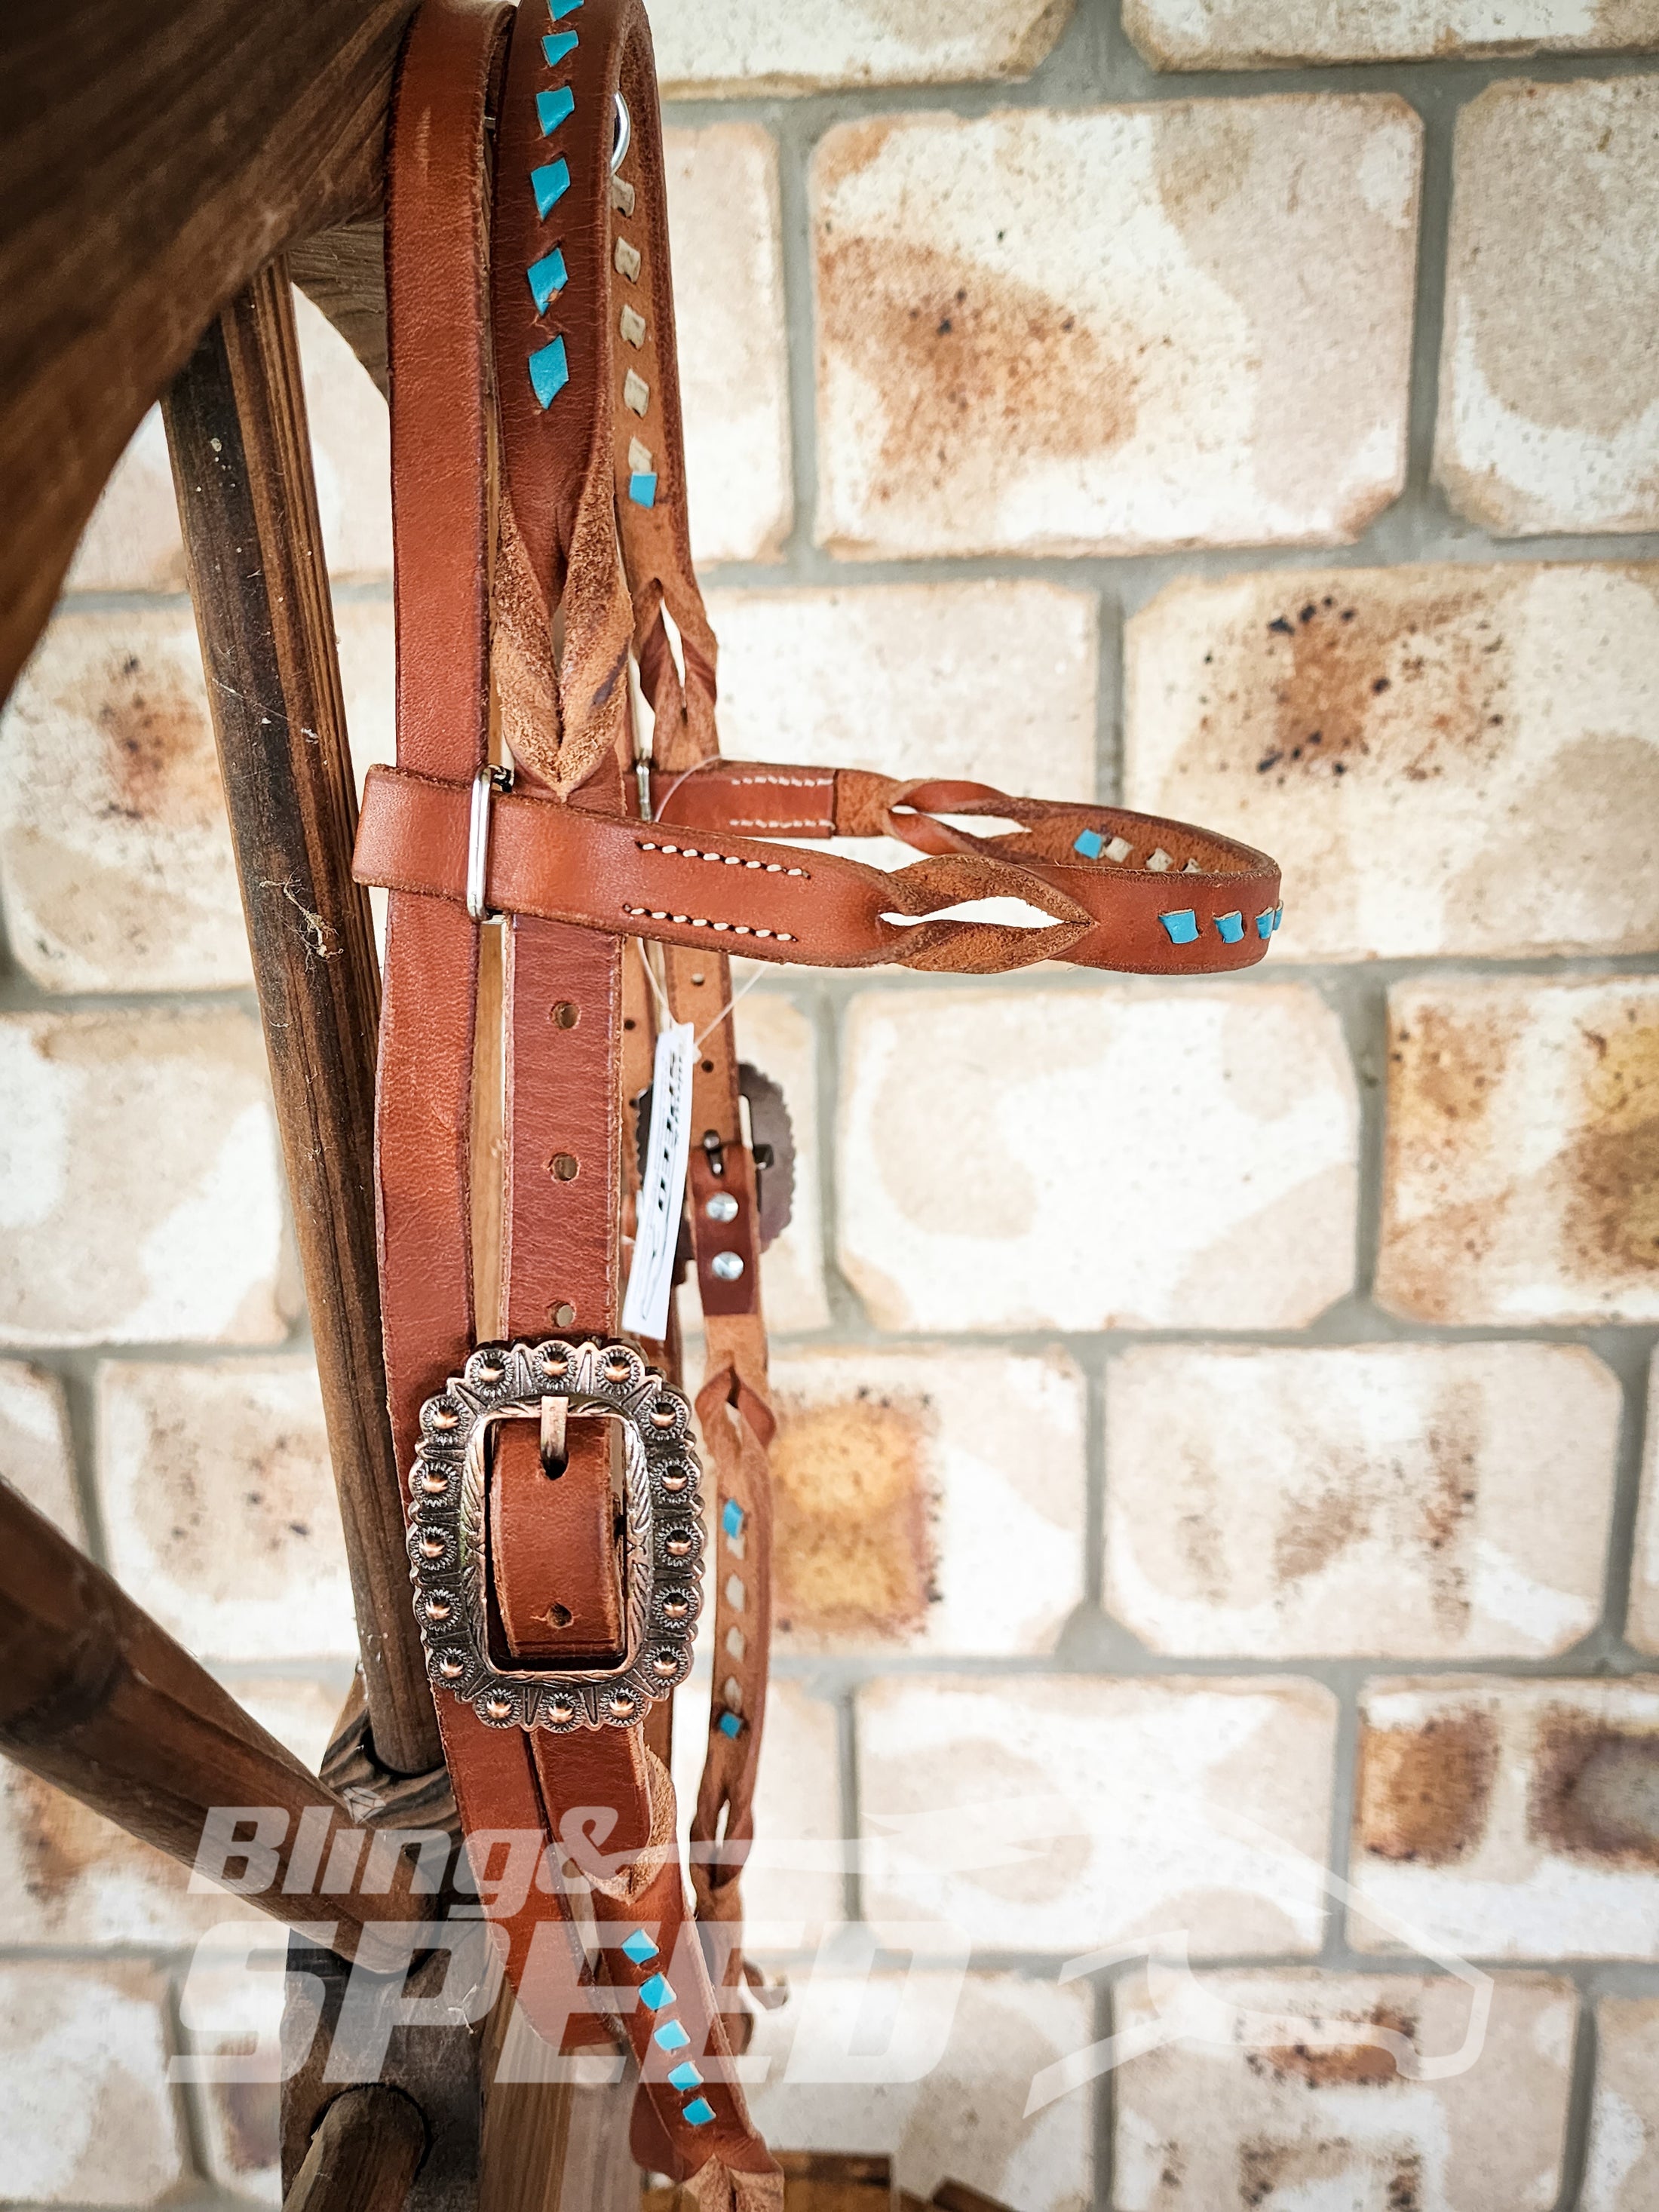 Bling and Speed Turquoise Buckstitched with Twisted Bloodknot Bridle (7981440270574)